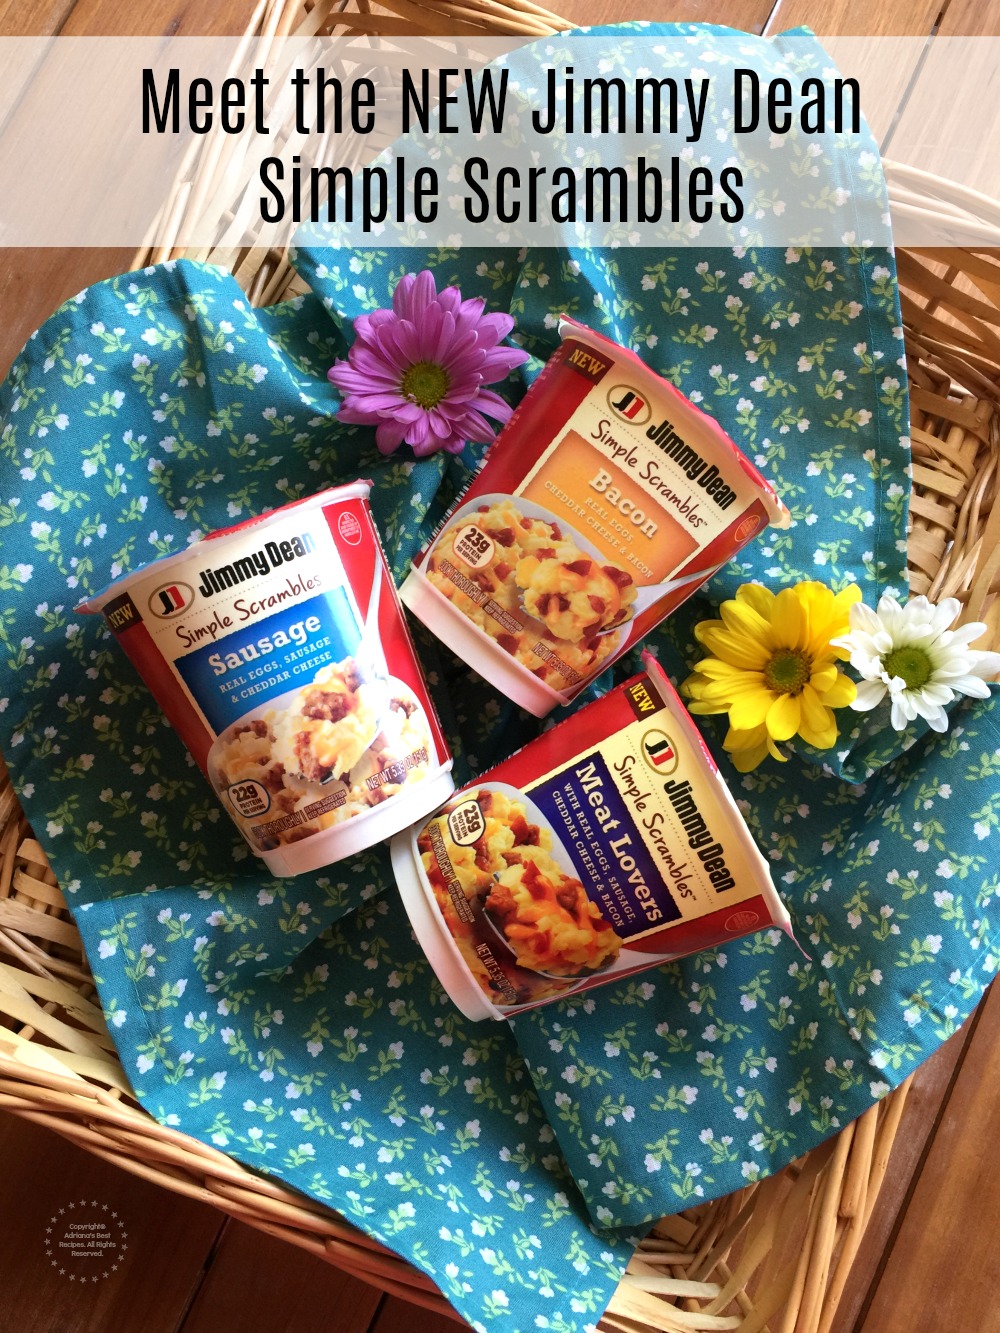 Meet the NEW Jimmy Dean Simple Scrambles Available at Walmart